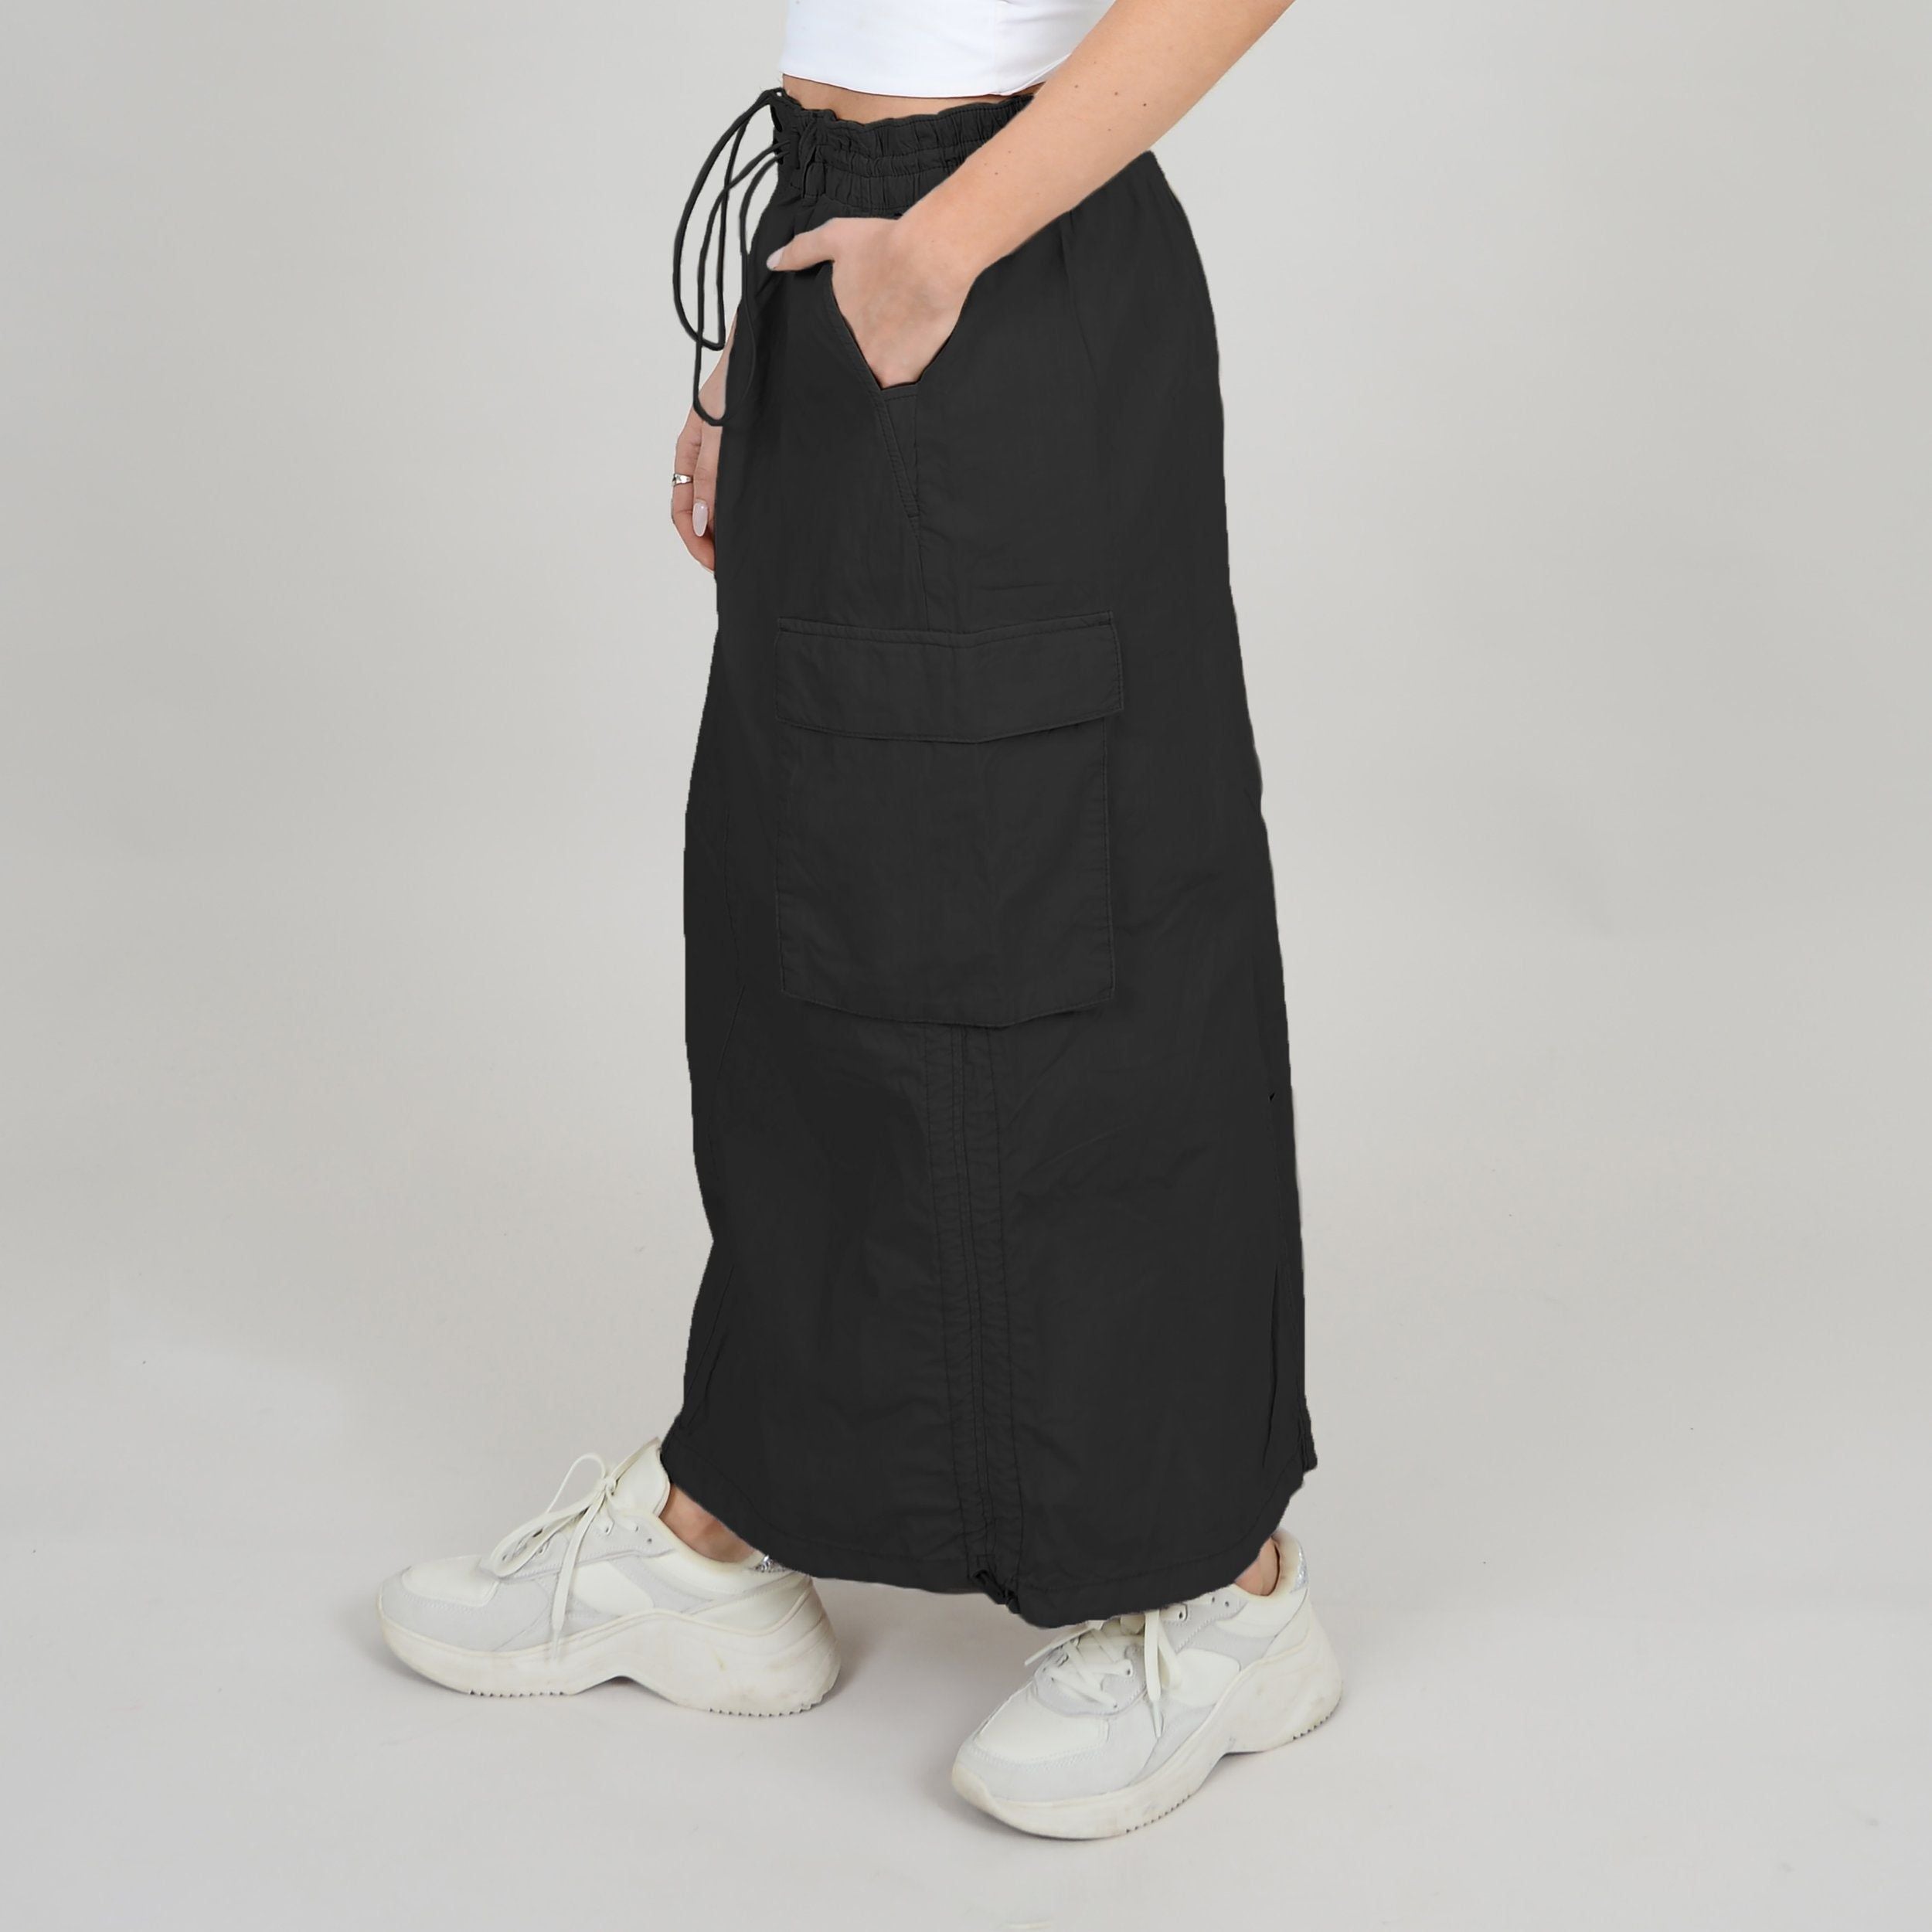 RD Style - Cargo Skirt in Black-SQ5951764